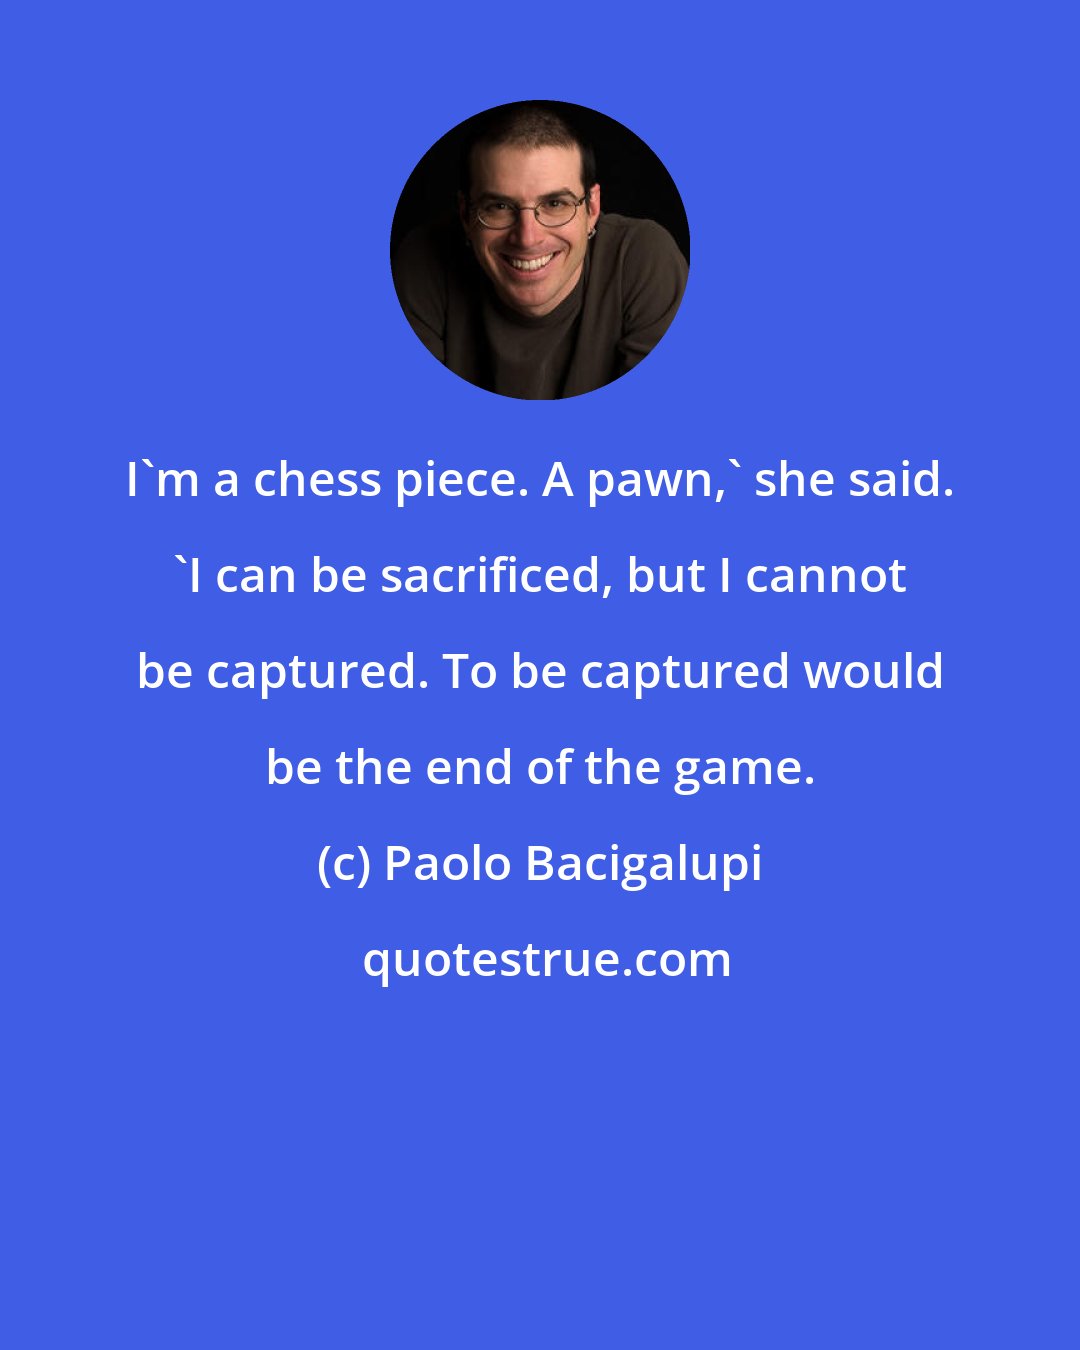 Paolo Bacigalupi: I'm a chess piece. A pawn,' she said. 'I can be sacrificed, but I cannot be captured. To be captured would be the end of the game.